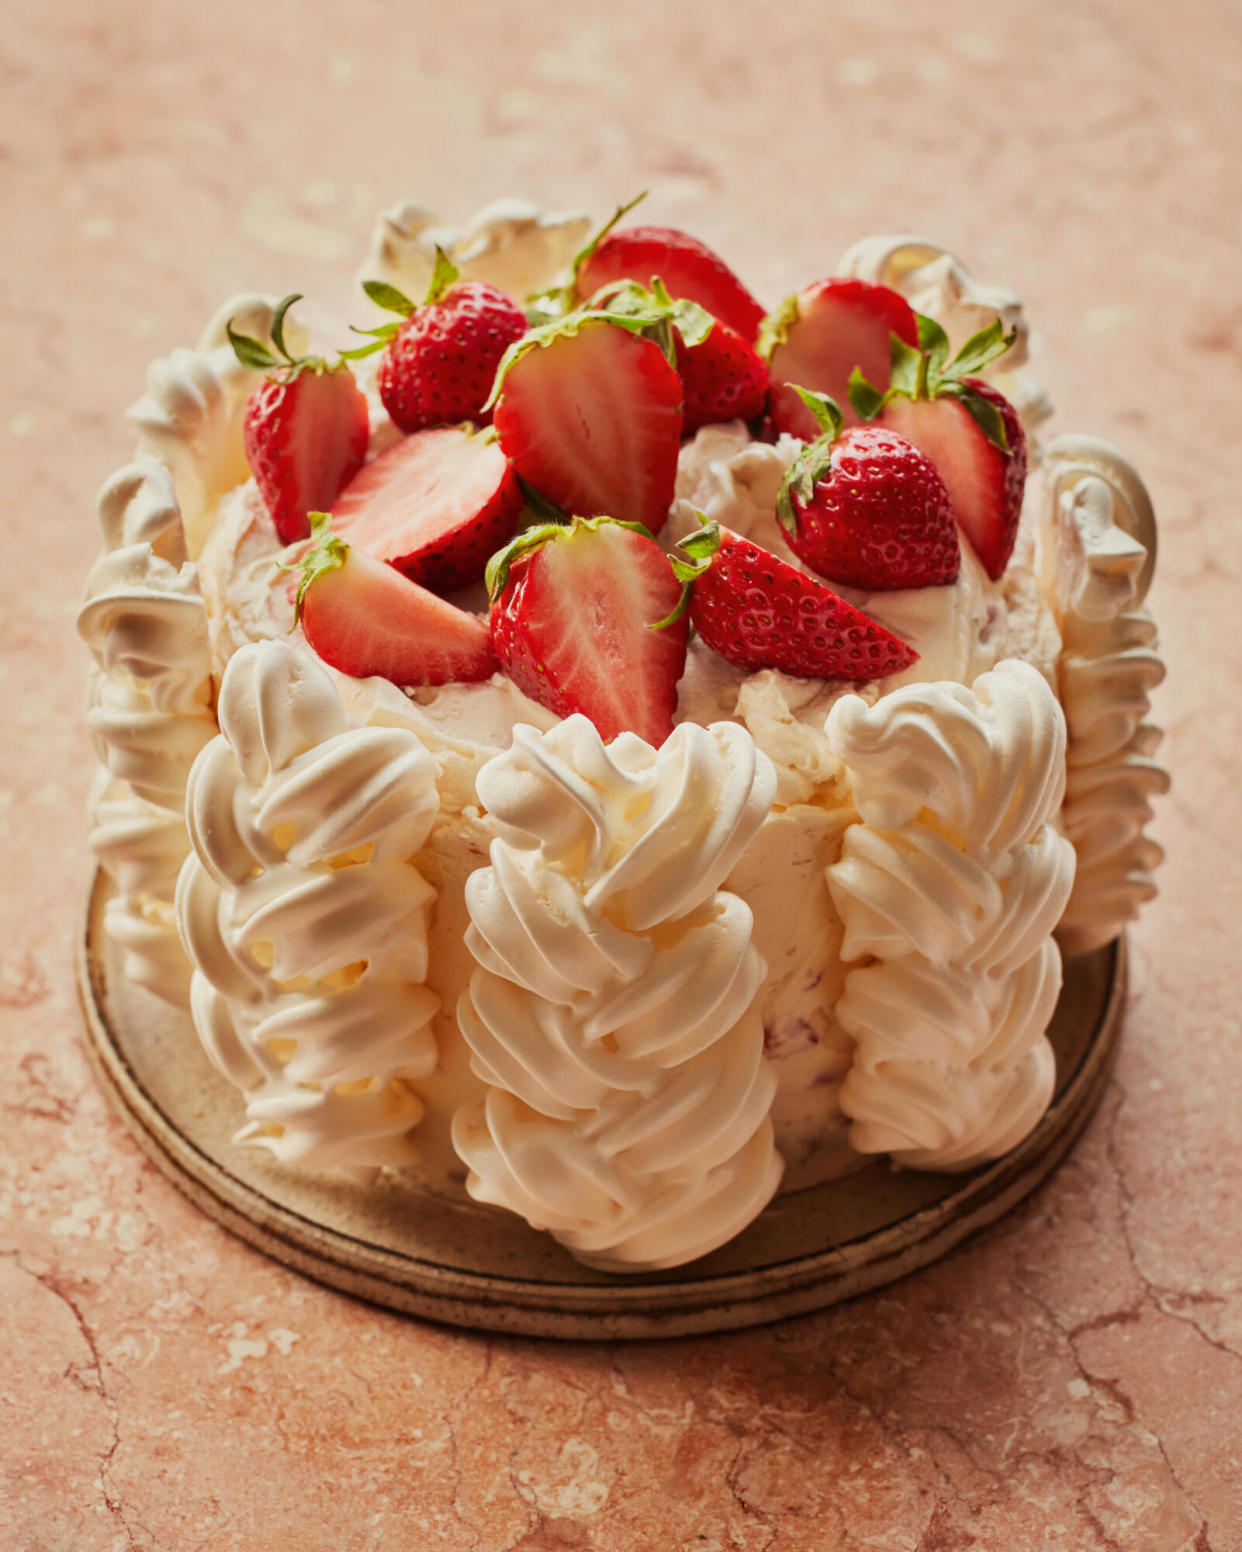 <span>Ravneet Gill’s gluten-free strawberry and meringue cream cake.</span><span>Photograph: Laura Edwards/The Guardian. Food styling: Benjamina Ebuehi. Prop styling: Anna Wilkins. Food styling assistant: Lara Cook.</span>